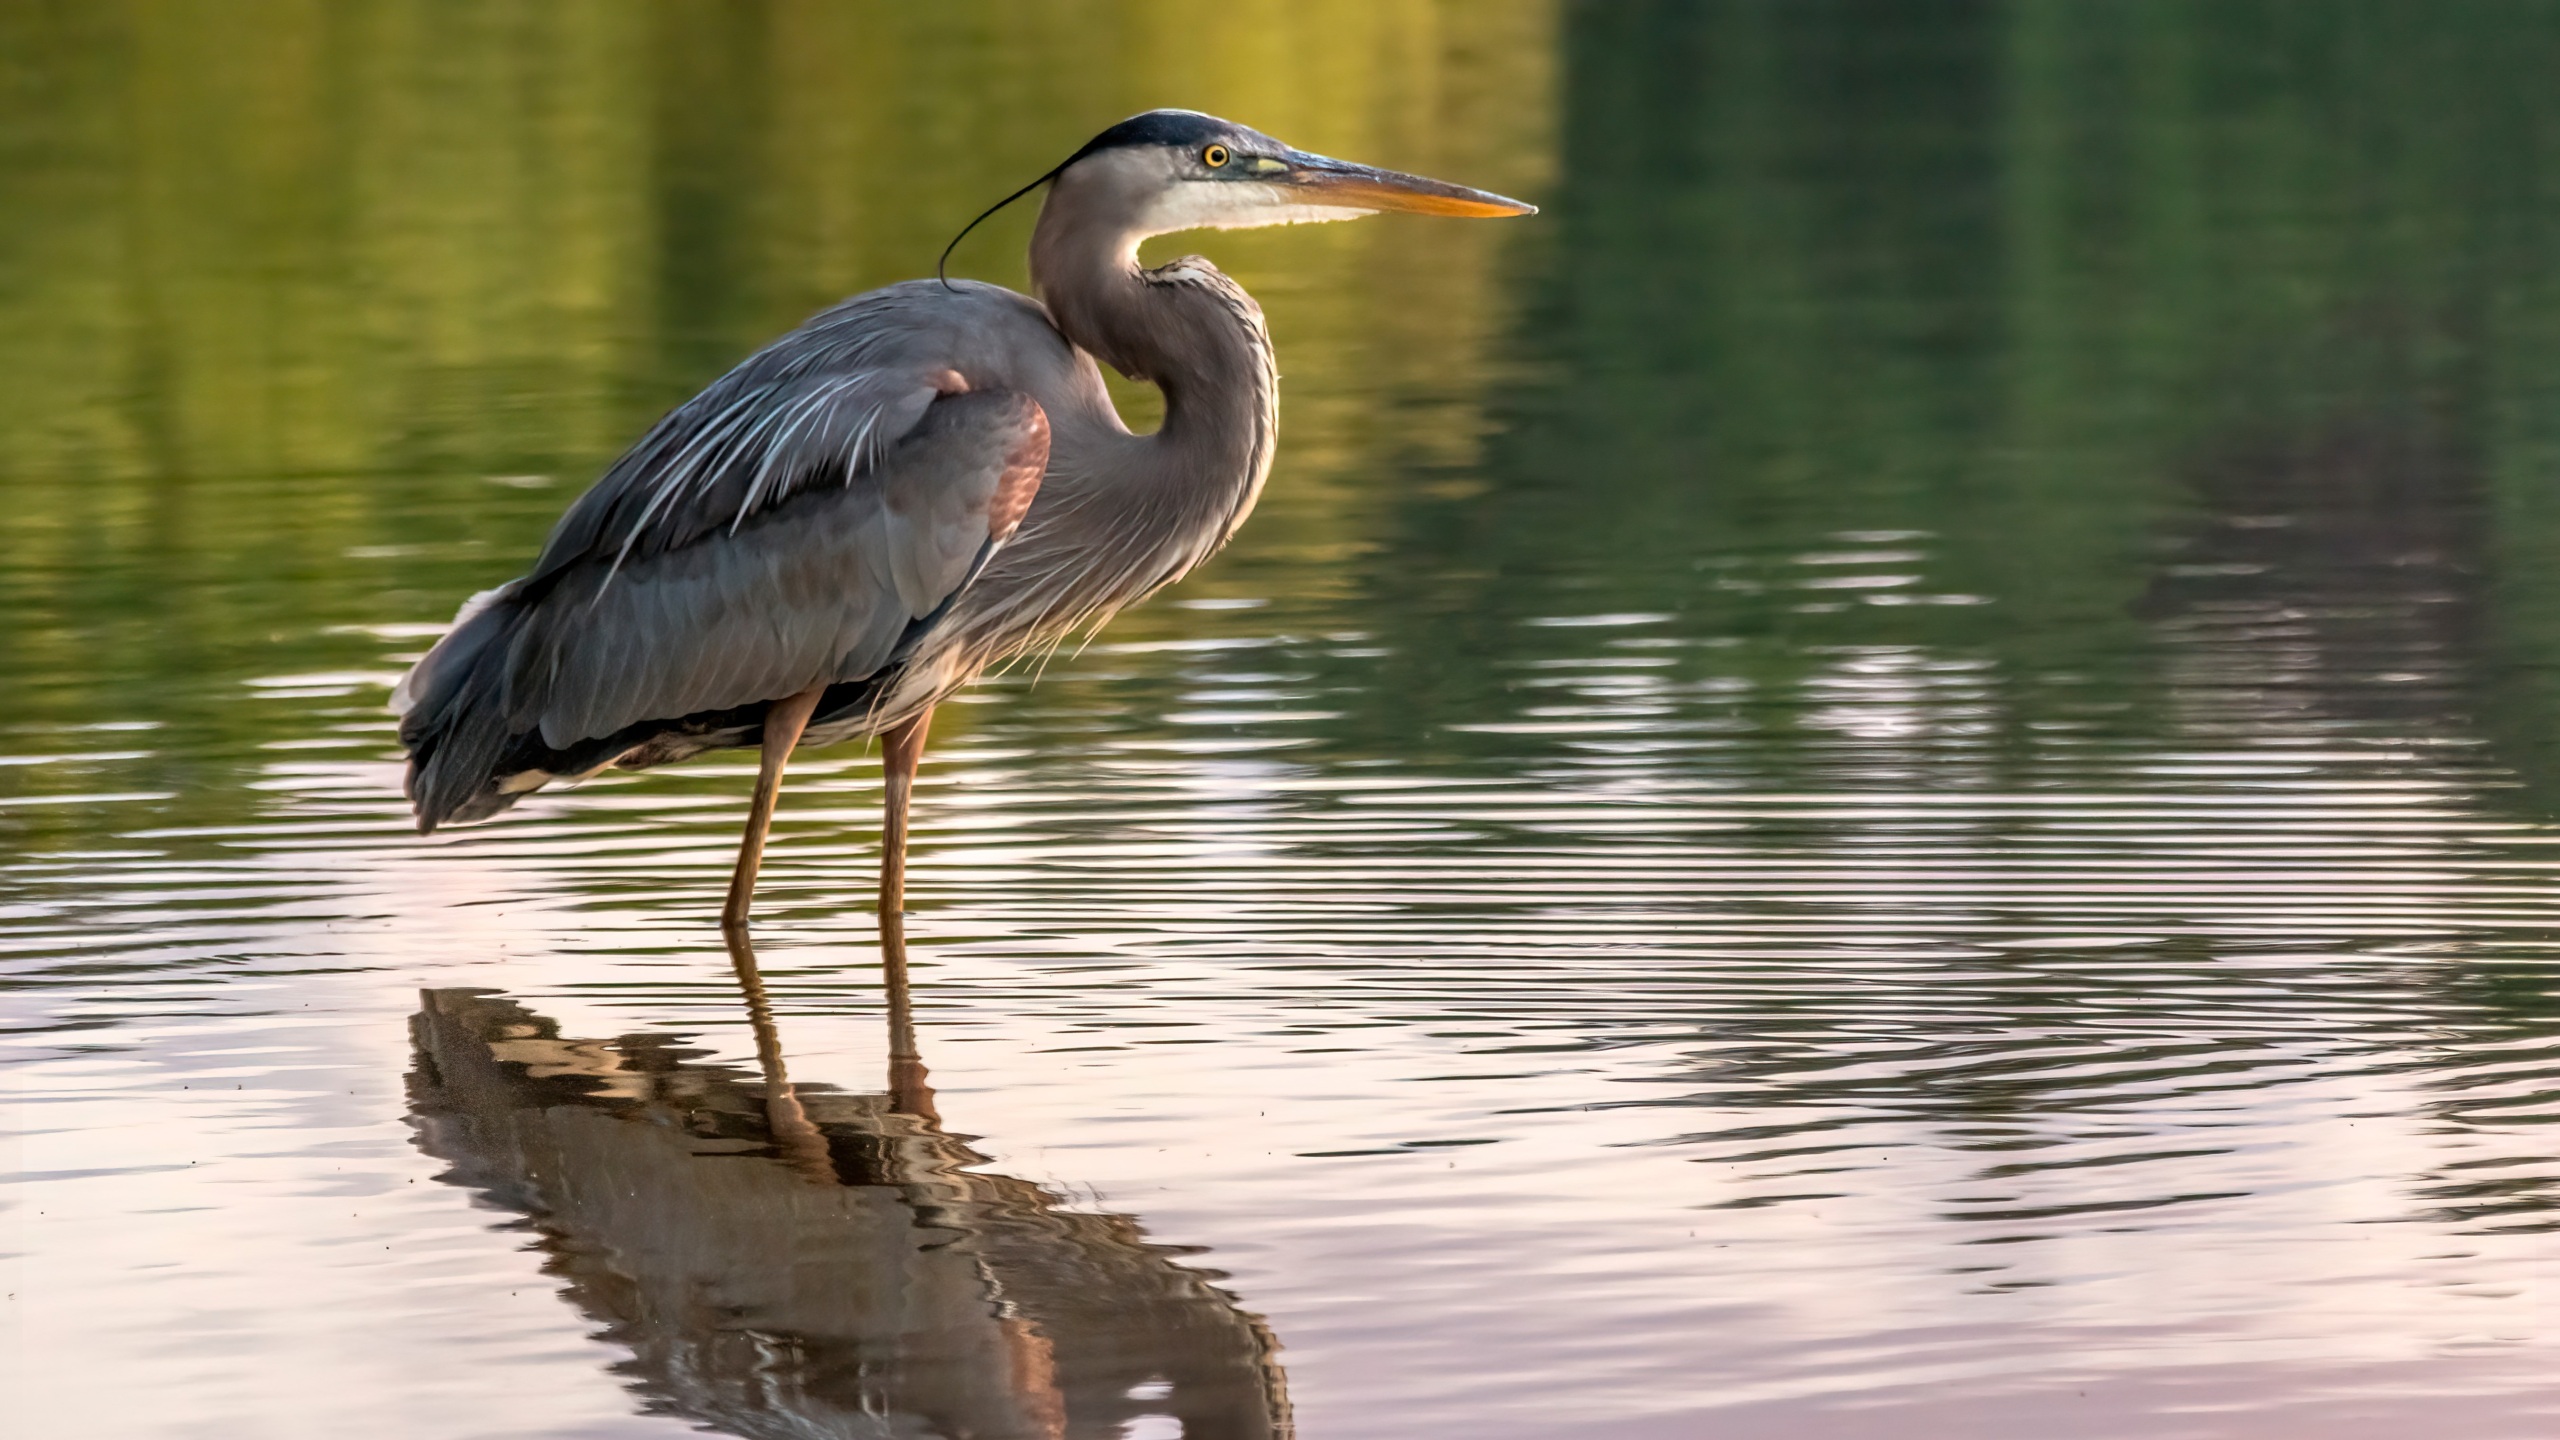 A blue heron standing in water with a reflection.